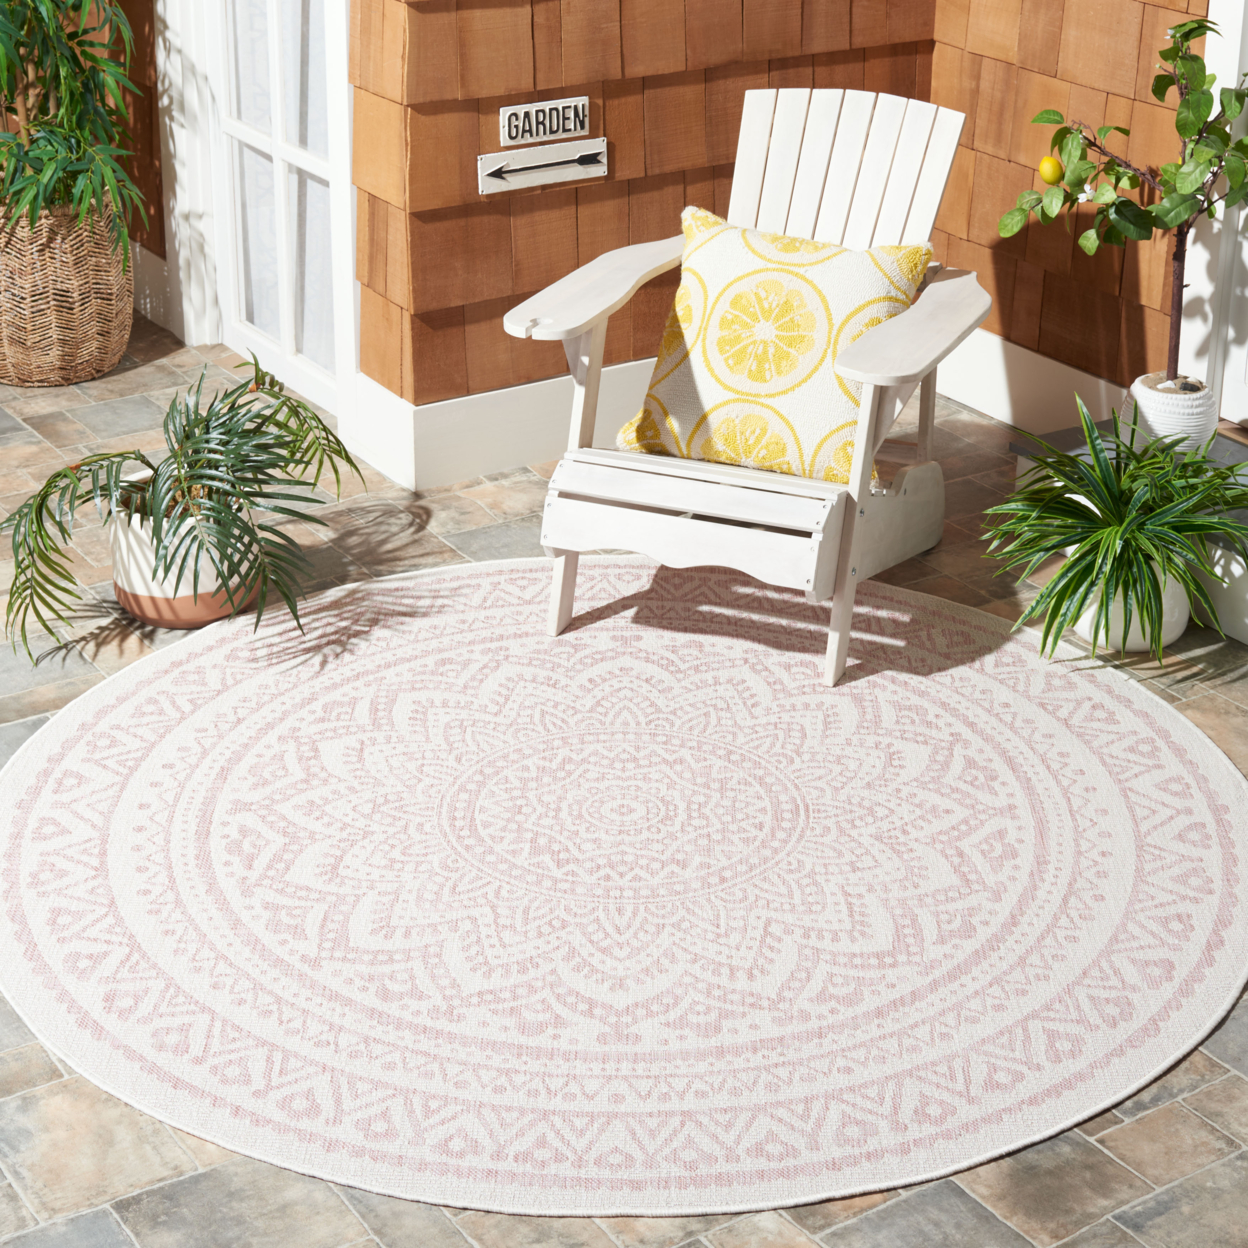 SAFAVIEH Outdoor CY8734-56212 Courtyard Ivory / Soft Pink Rug - 2' 3 X 8'